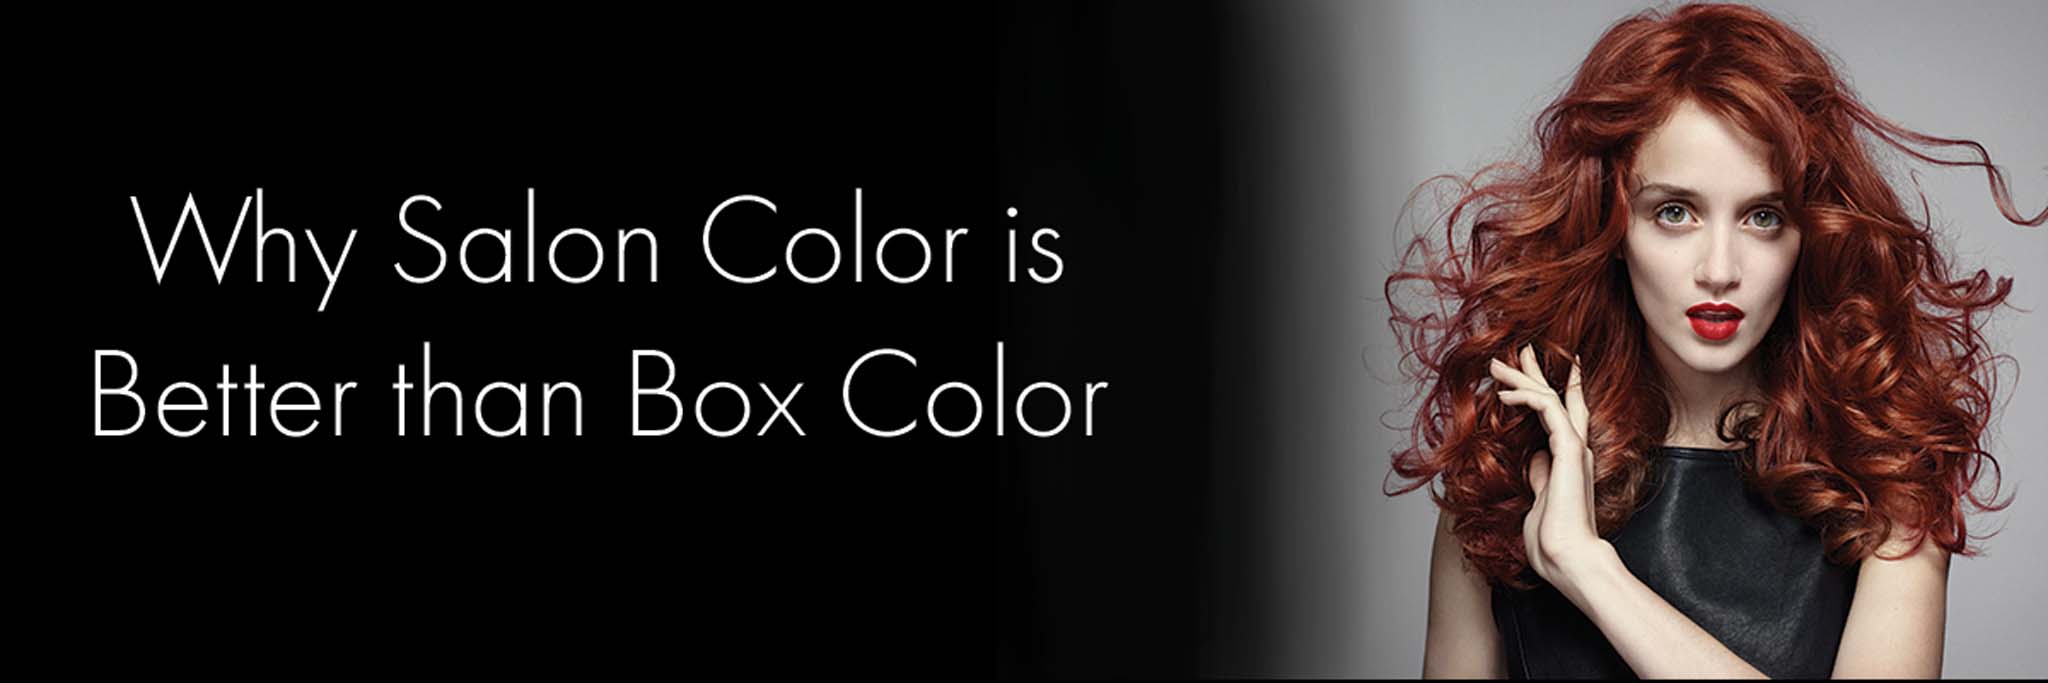 Why salon color is better than box color